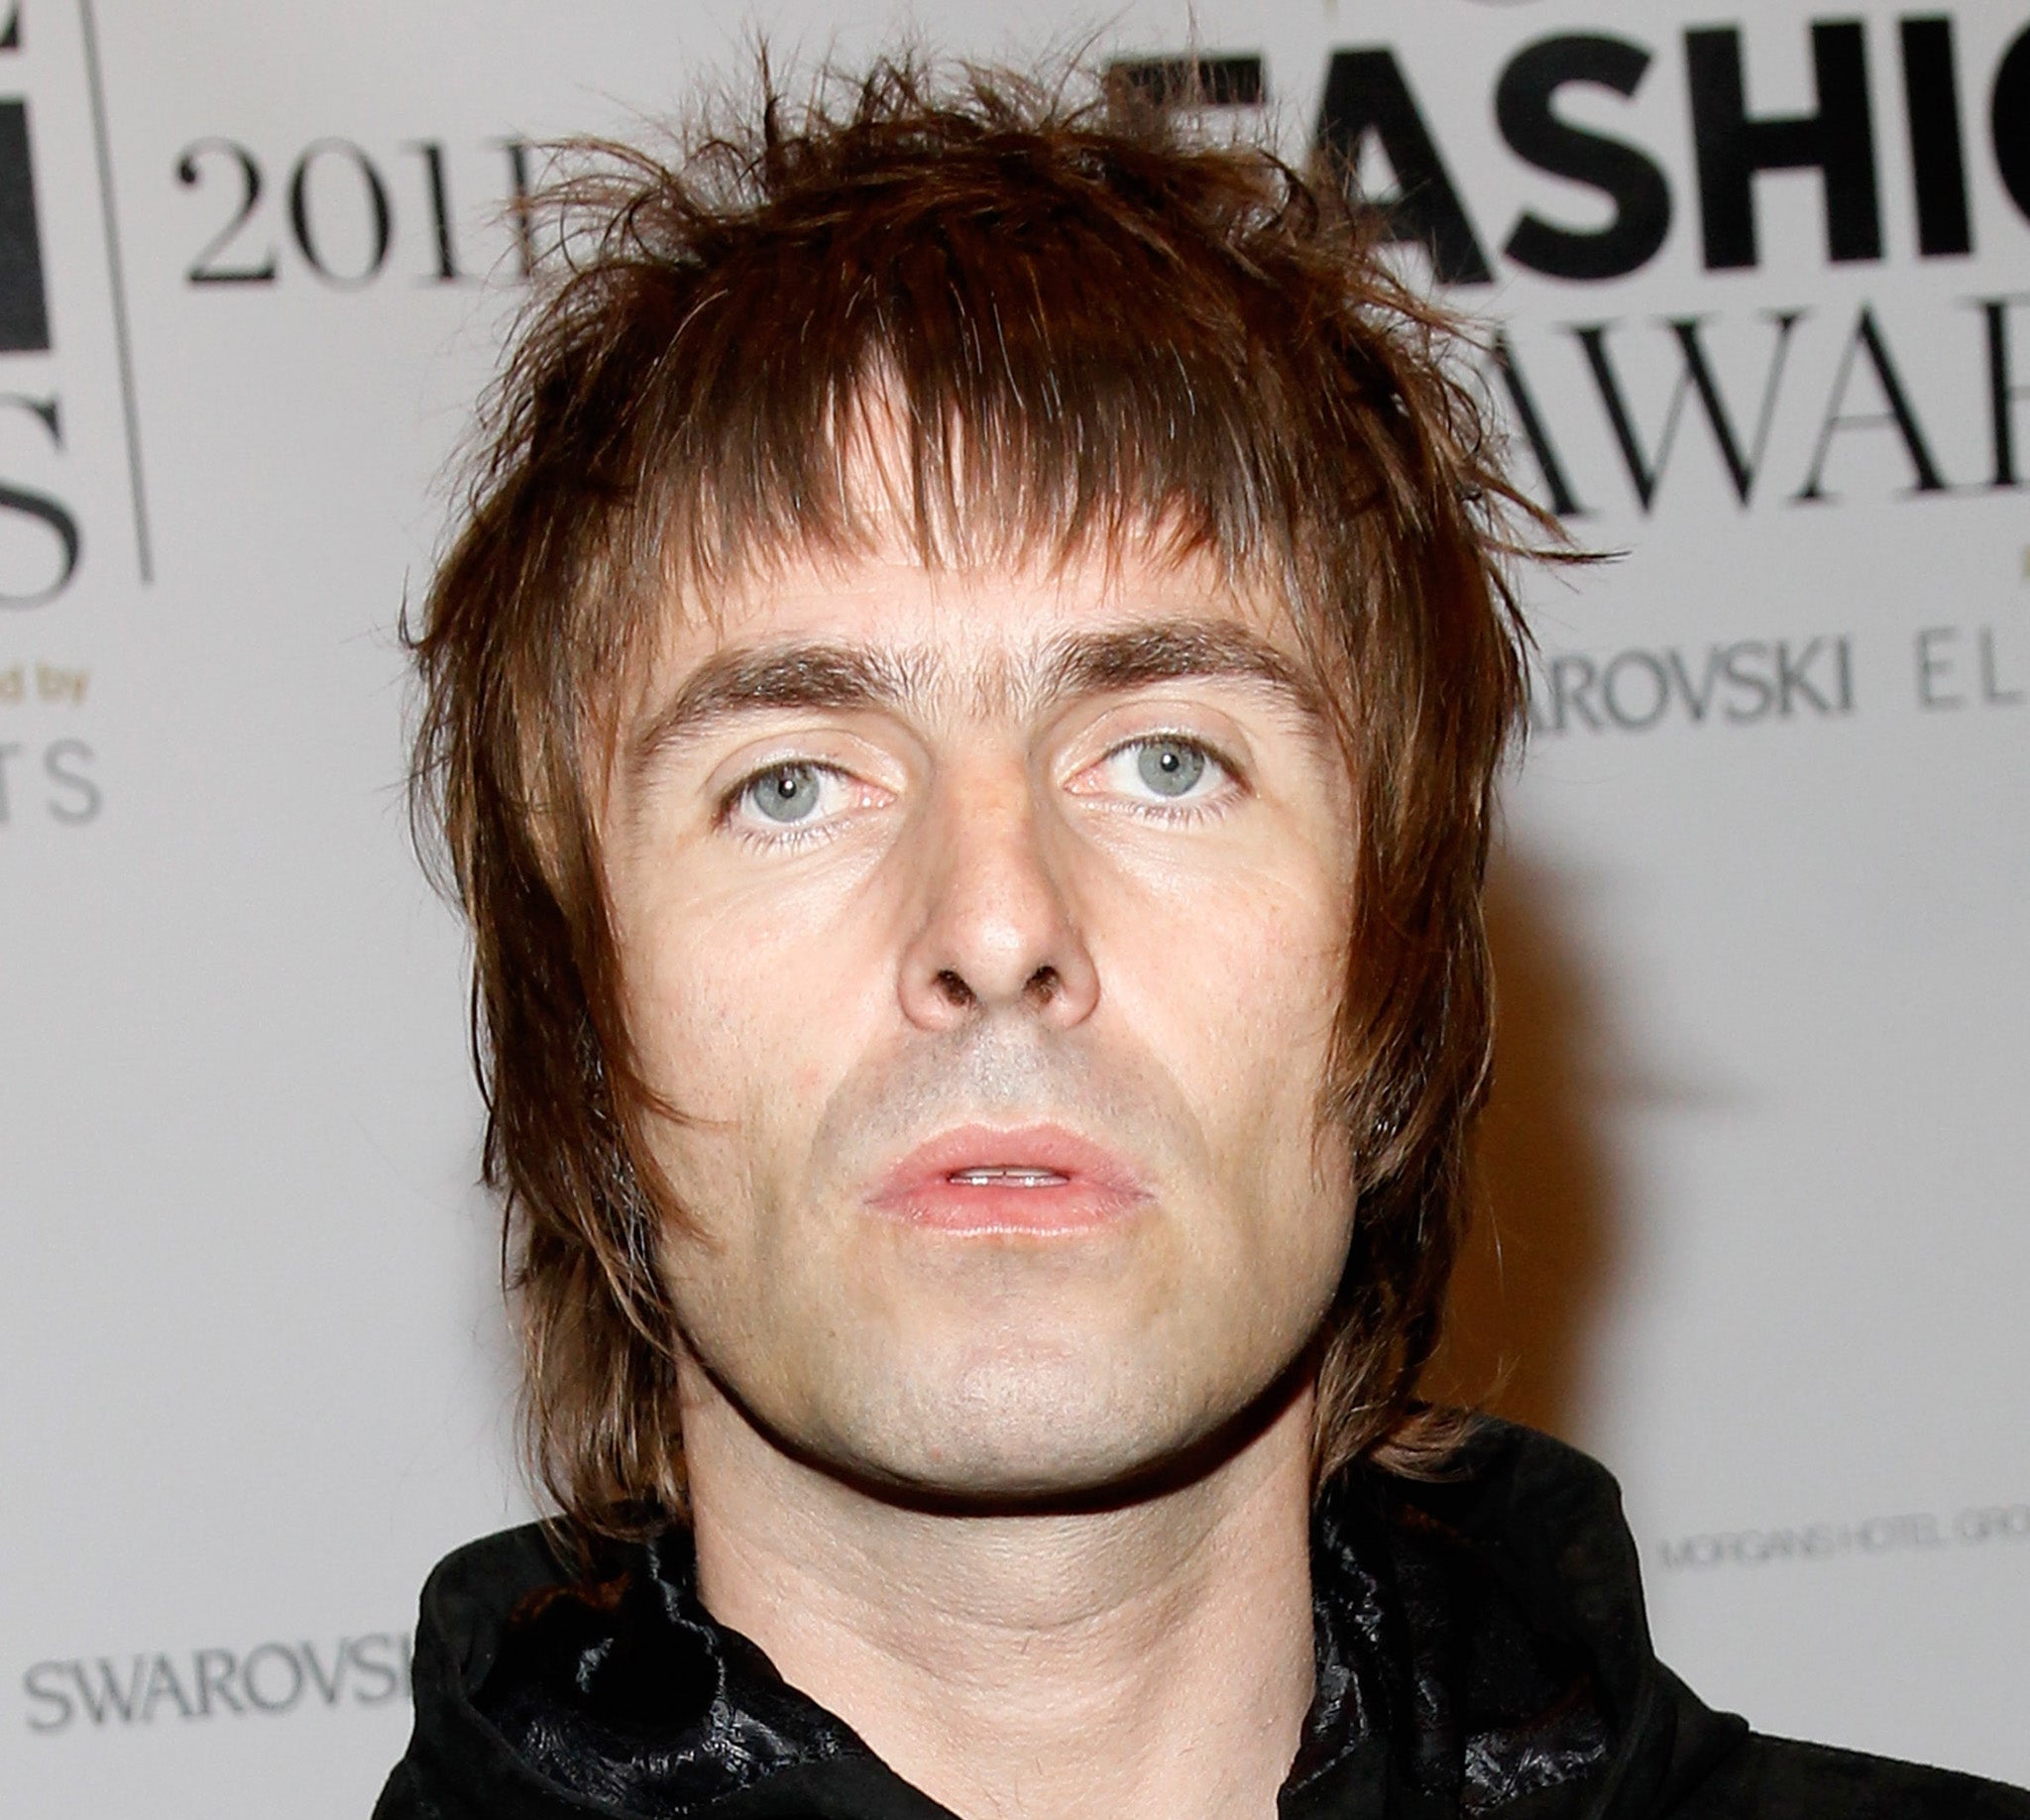 Liam Gallagher has decided to start another spat with Robbie Williams by calling him a 'clown'